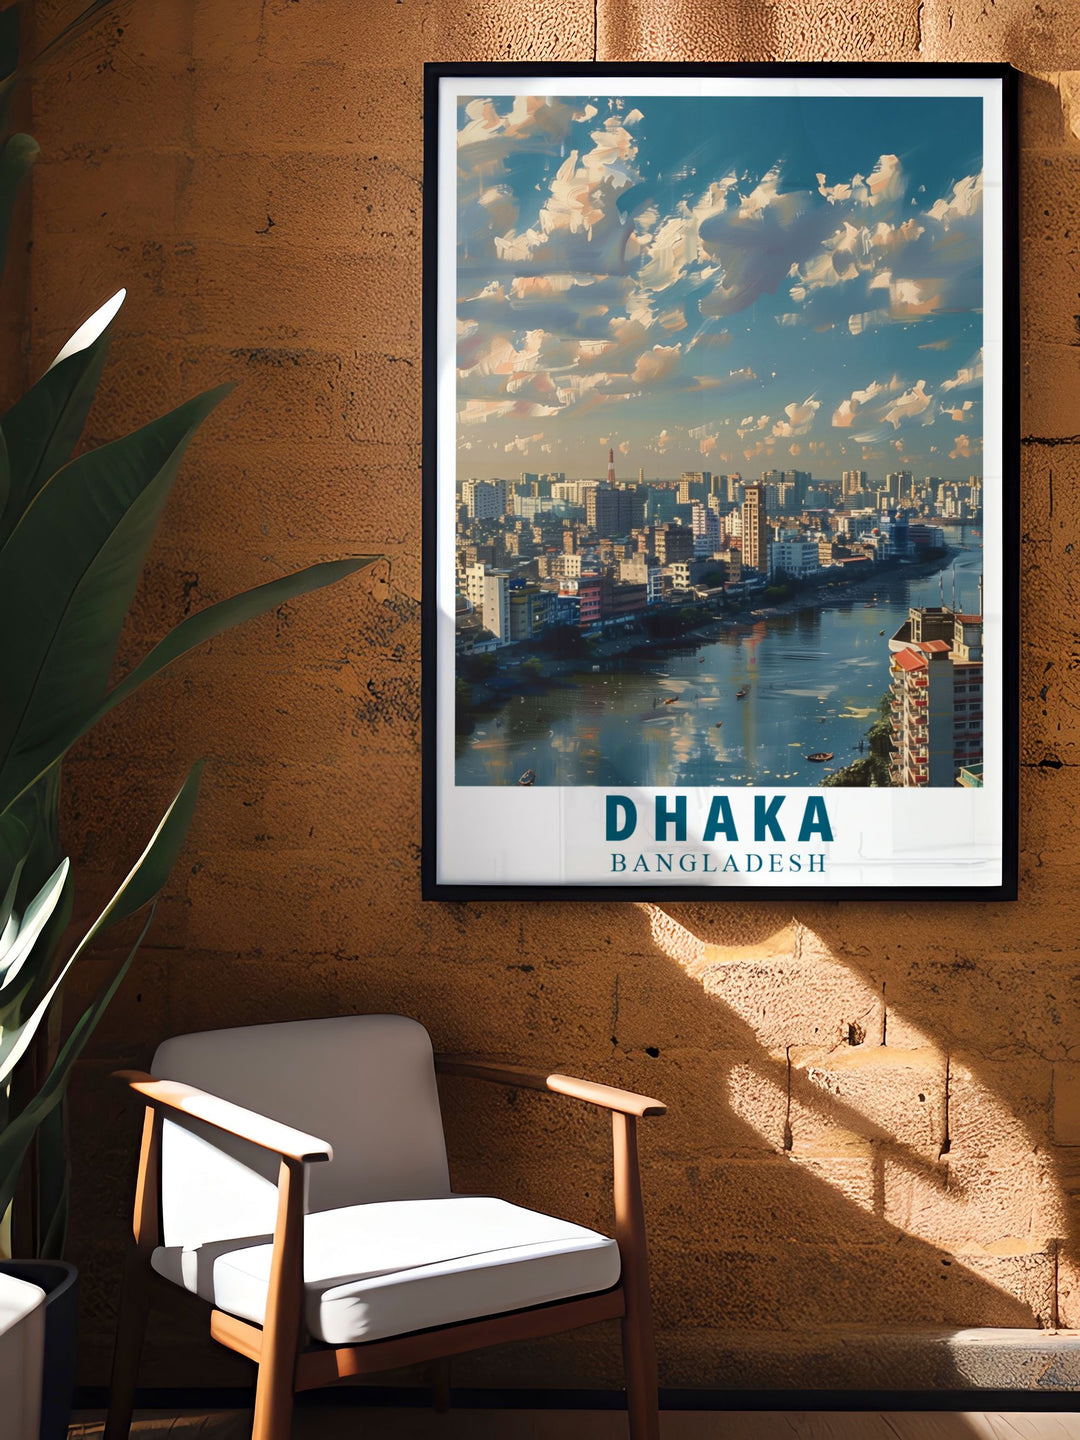 Unique Dhaka Painting capturing the essence of Bangladeshs capital city. Perfect for home decor or as a special gift this Dhaka artwork brings a sense of adventure and cultural richness to any living space. An ideal addition for art enthusiasts and travelers.